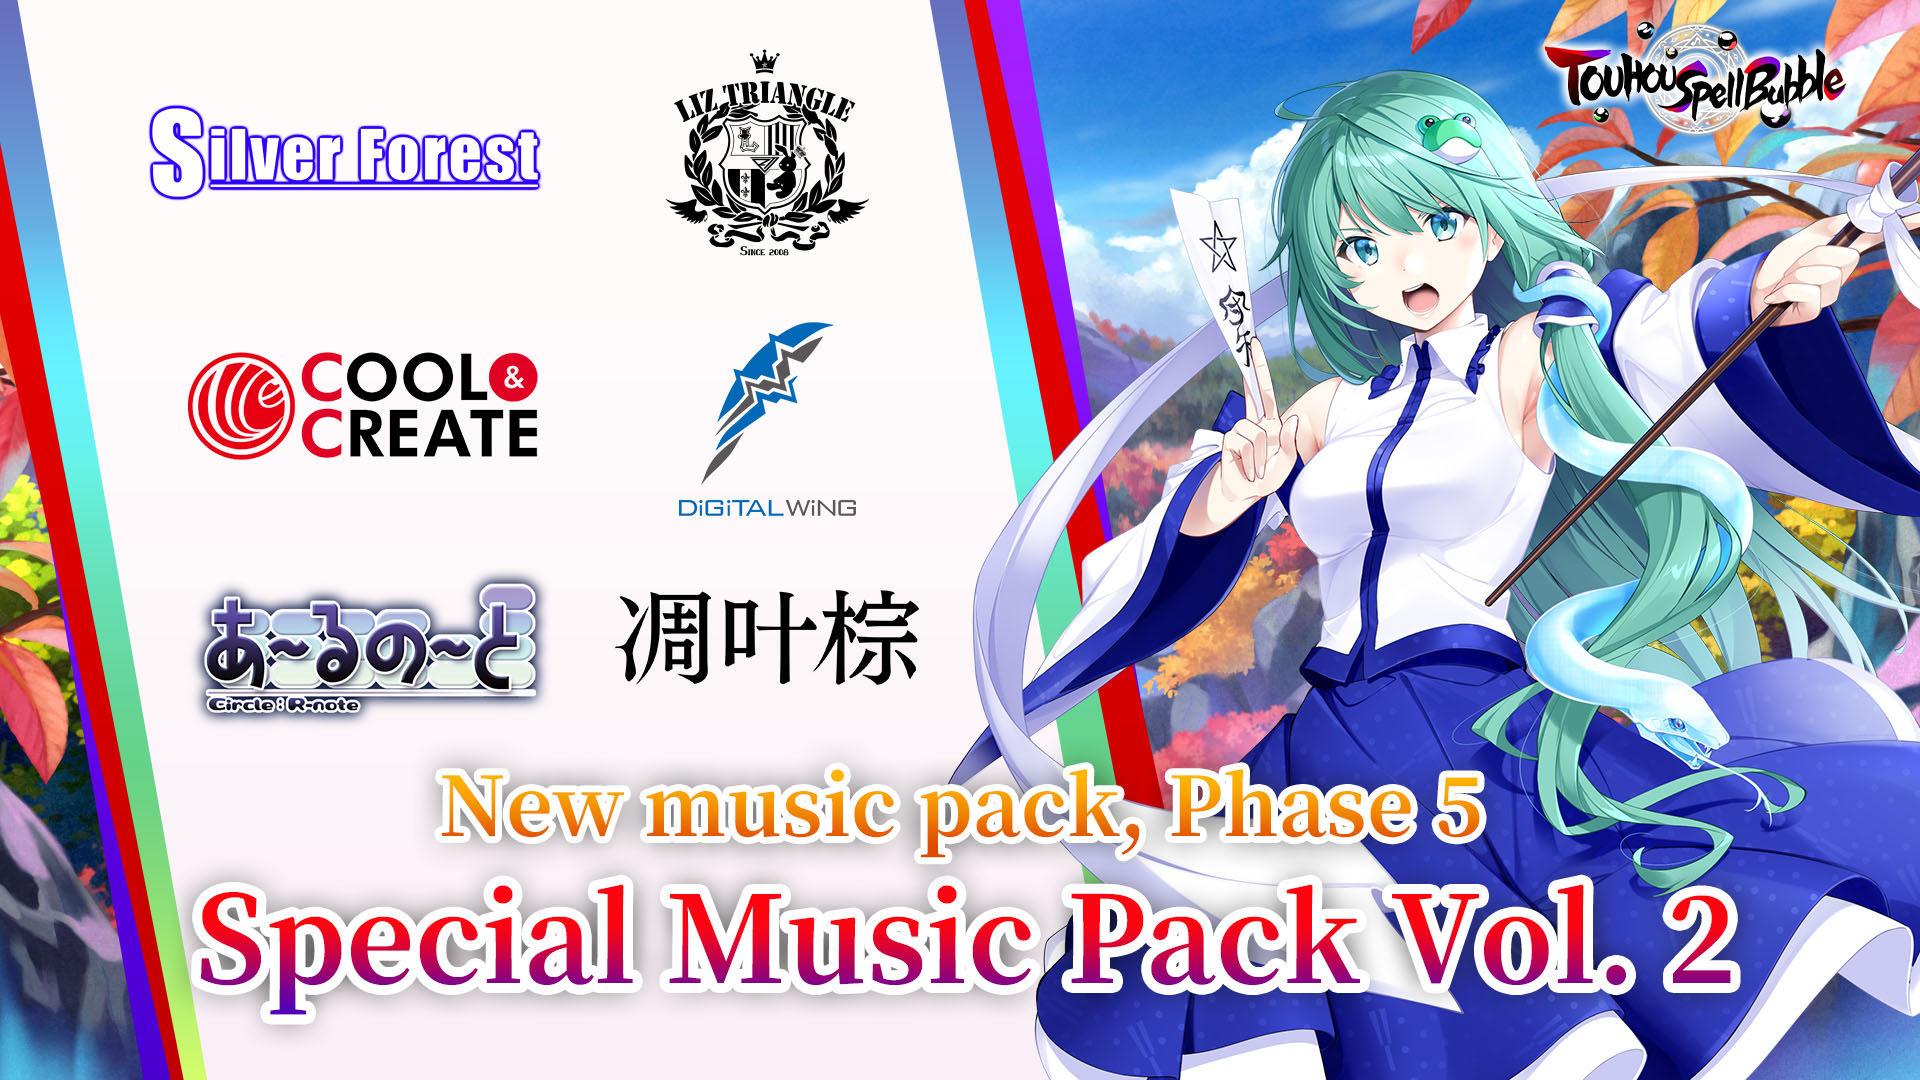 Special Music Pack Vol. 2